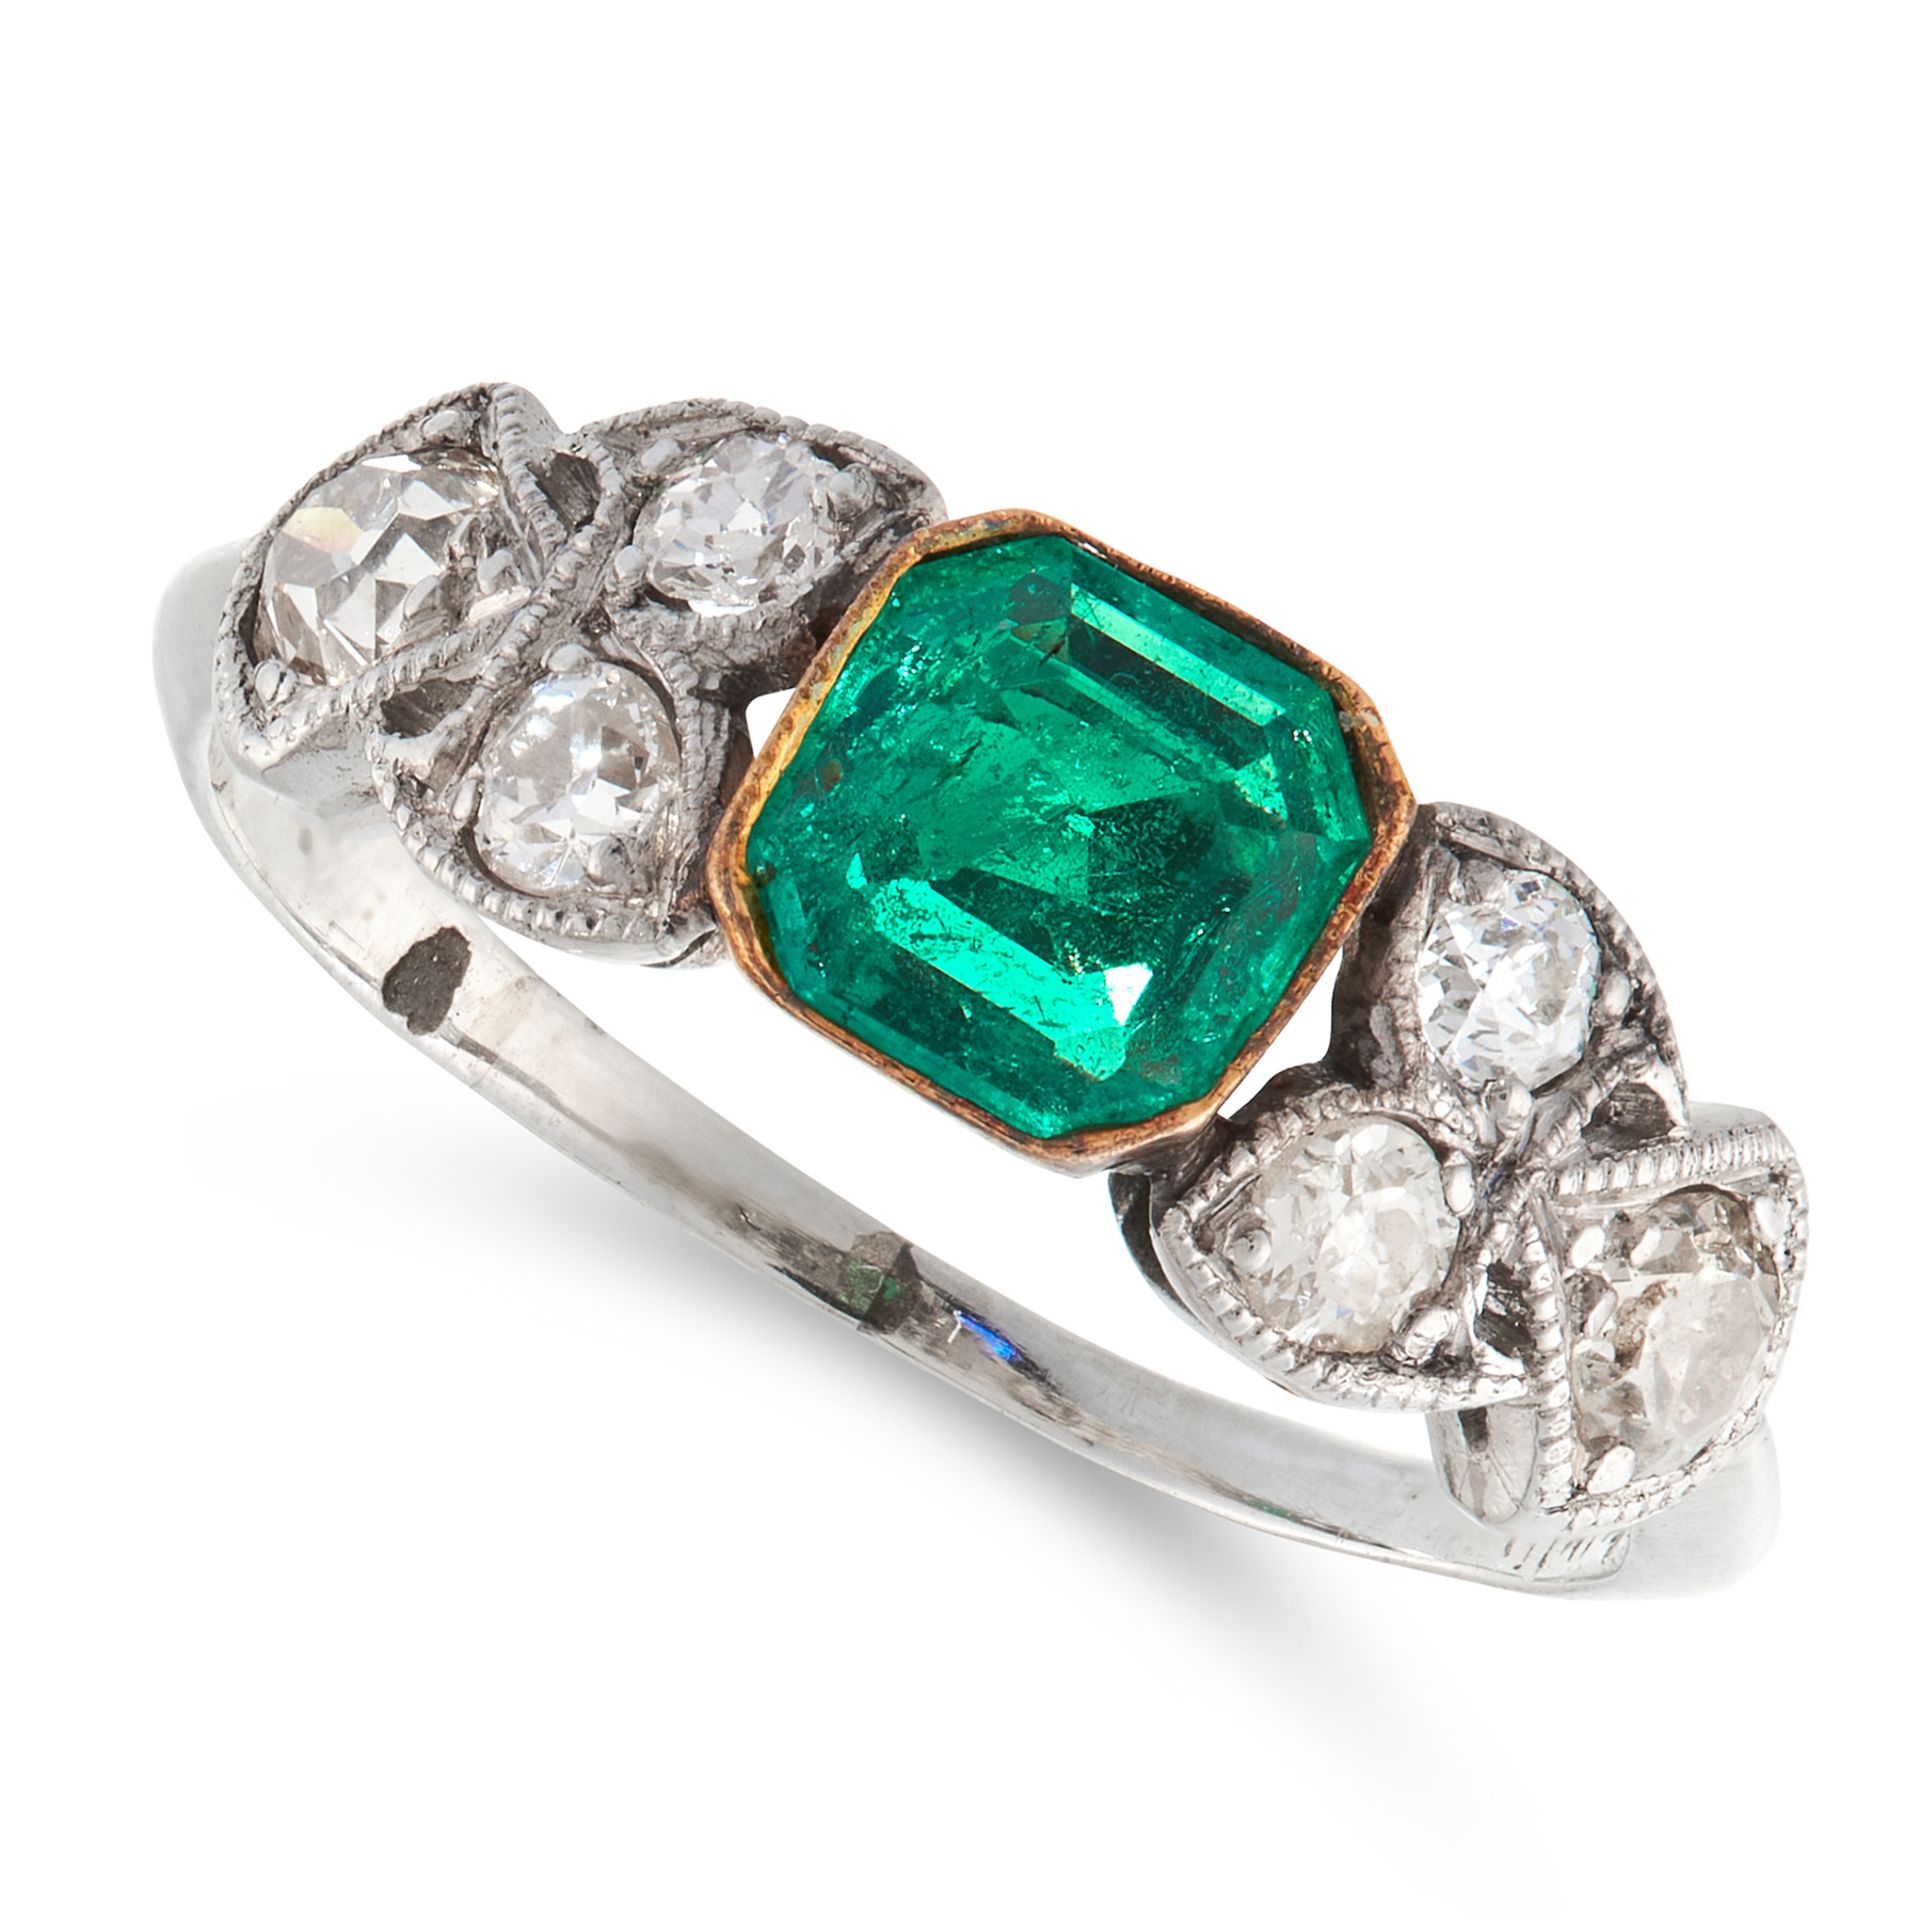 AN EMERALD AND DIAMOND DRESS RING in platinum, set with an emerald cut emerald of 0.37 carats - Image 2 of 2